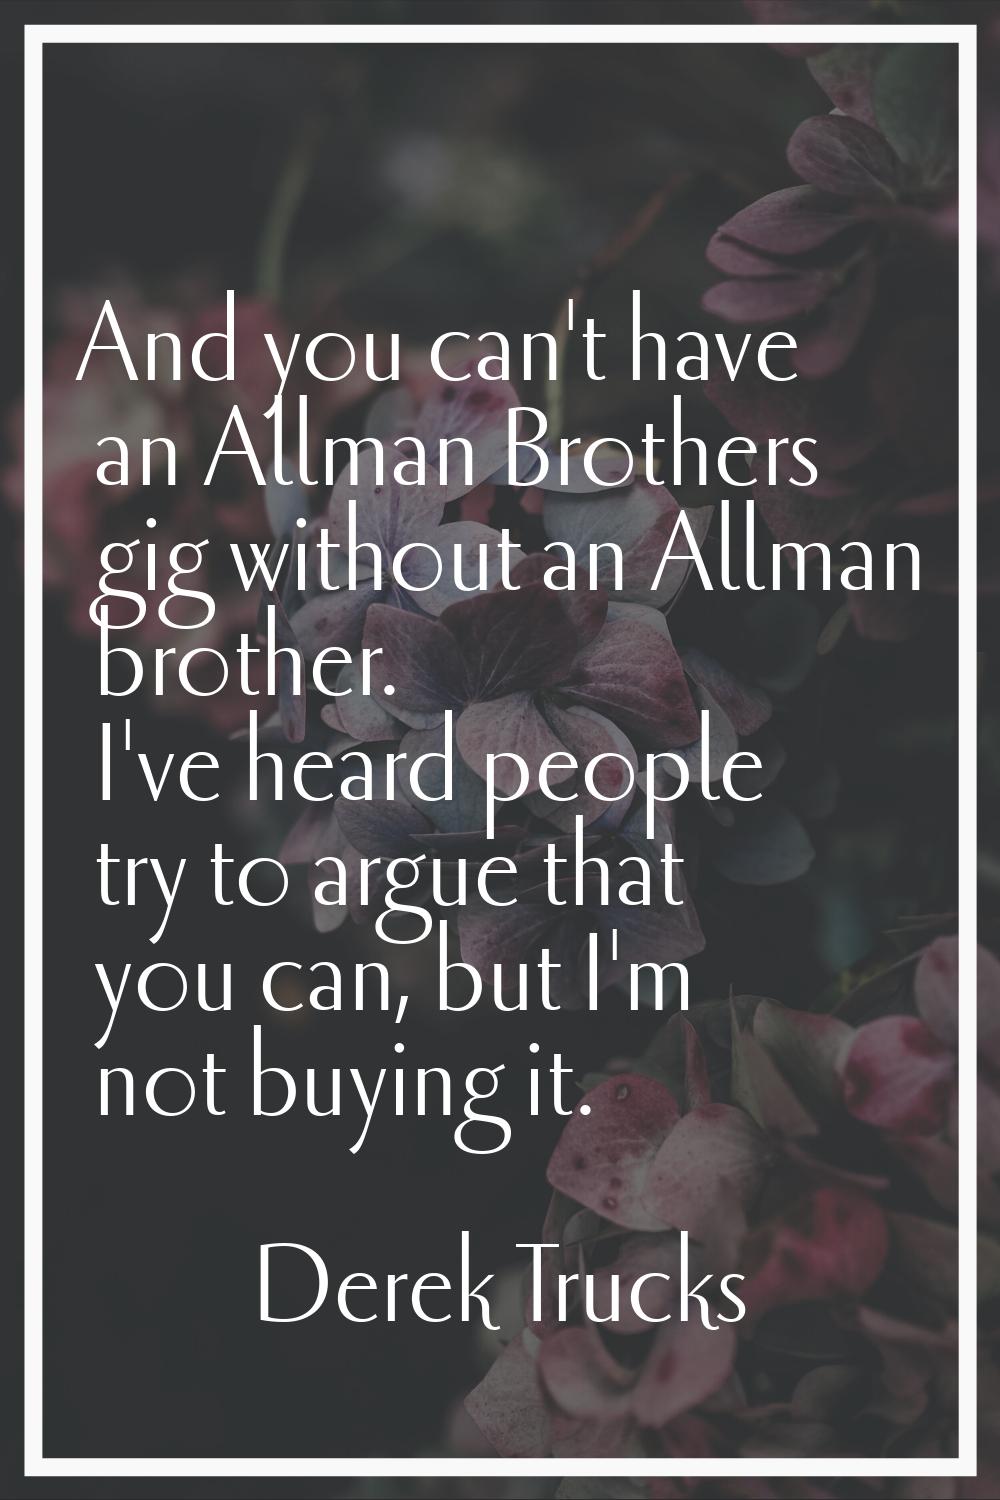 And you can't have an Allman Brothers gig without an Allman brother. I've heard people try to argue